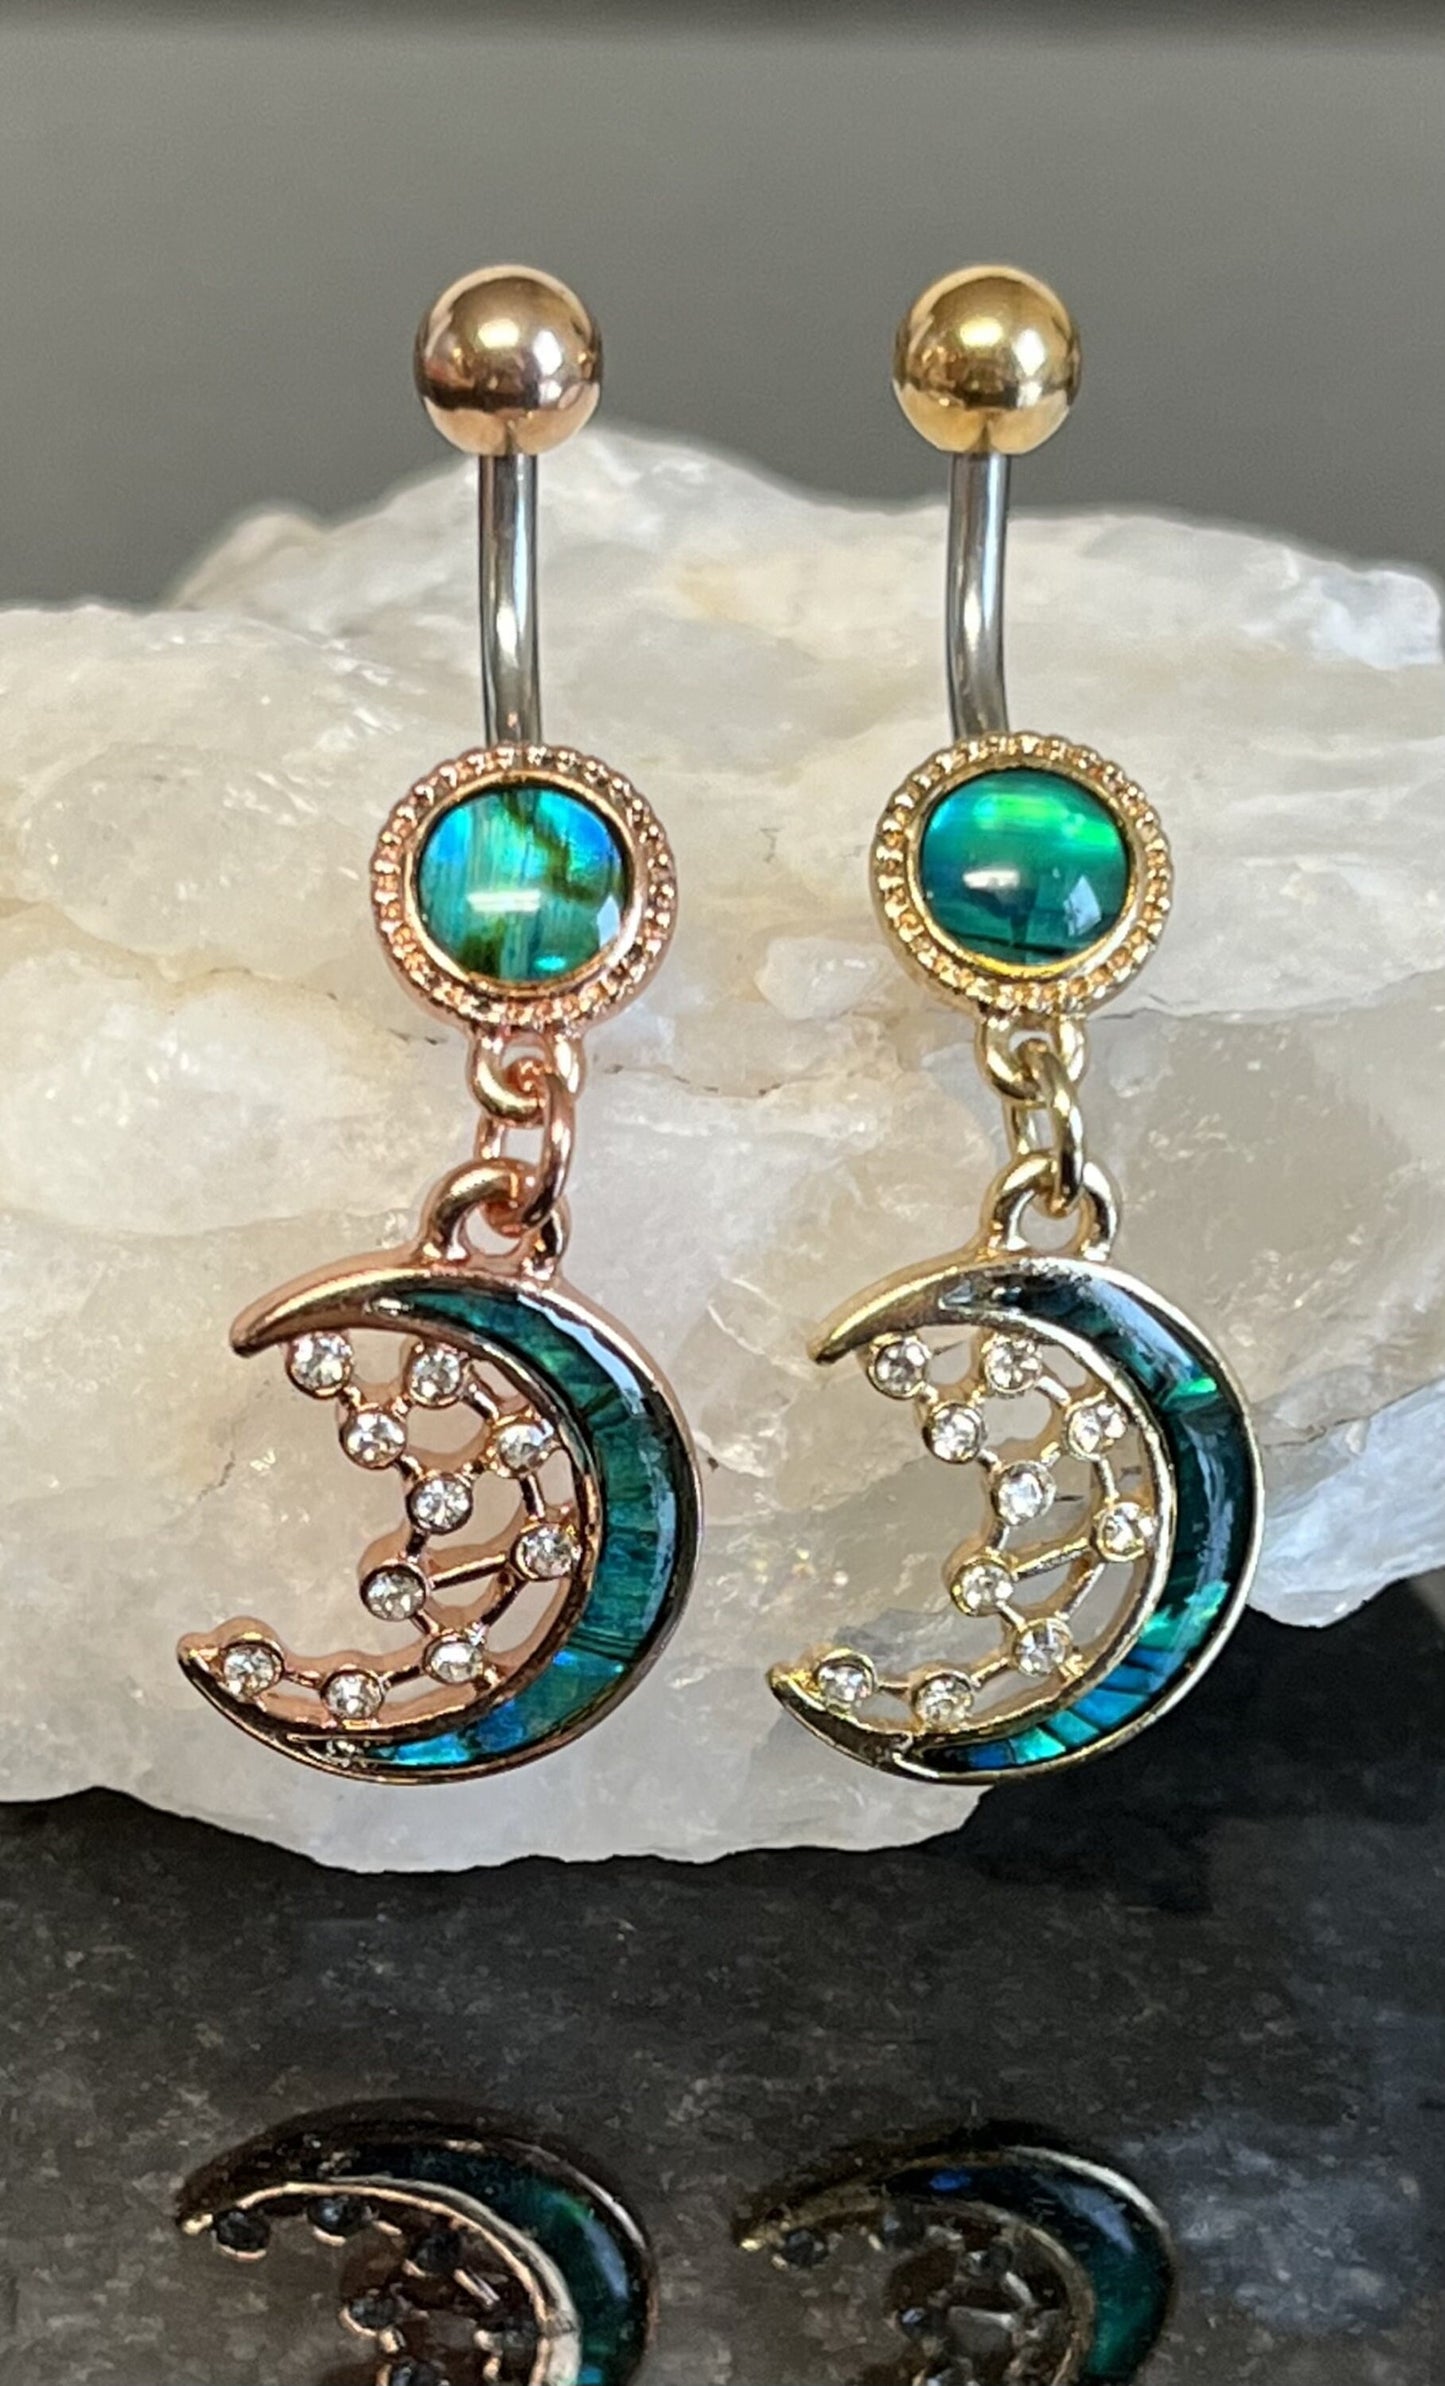 1 Piece Unique Abalone Shell Inlay Crescent Moon with CZ Stars Dangle Navel / Naval Belly Ring - 14g - 10mm - Gold and Rose Gold Available!